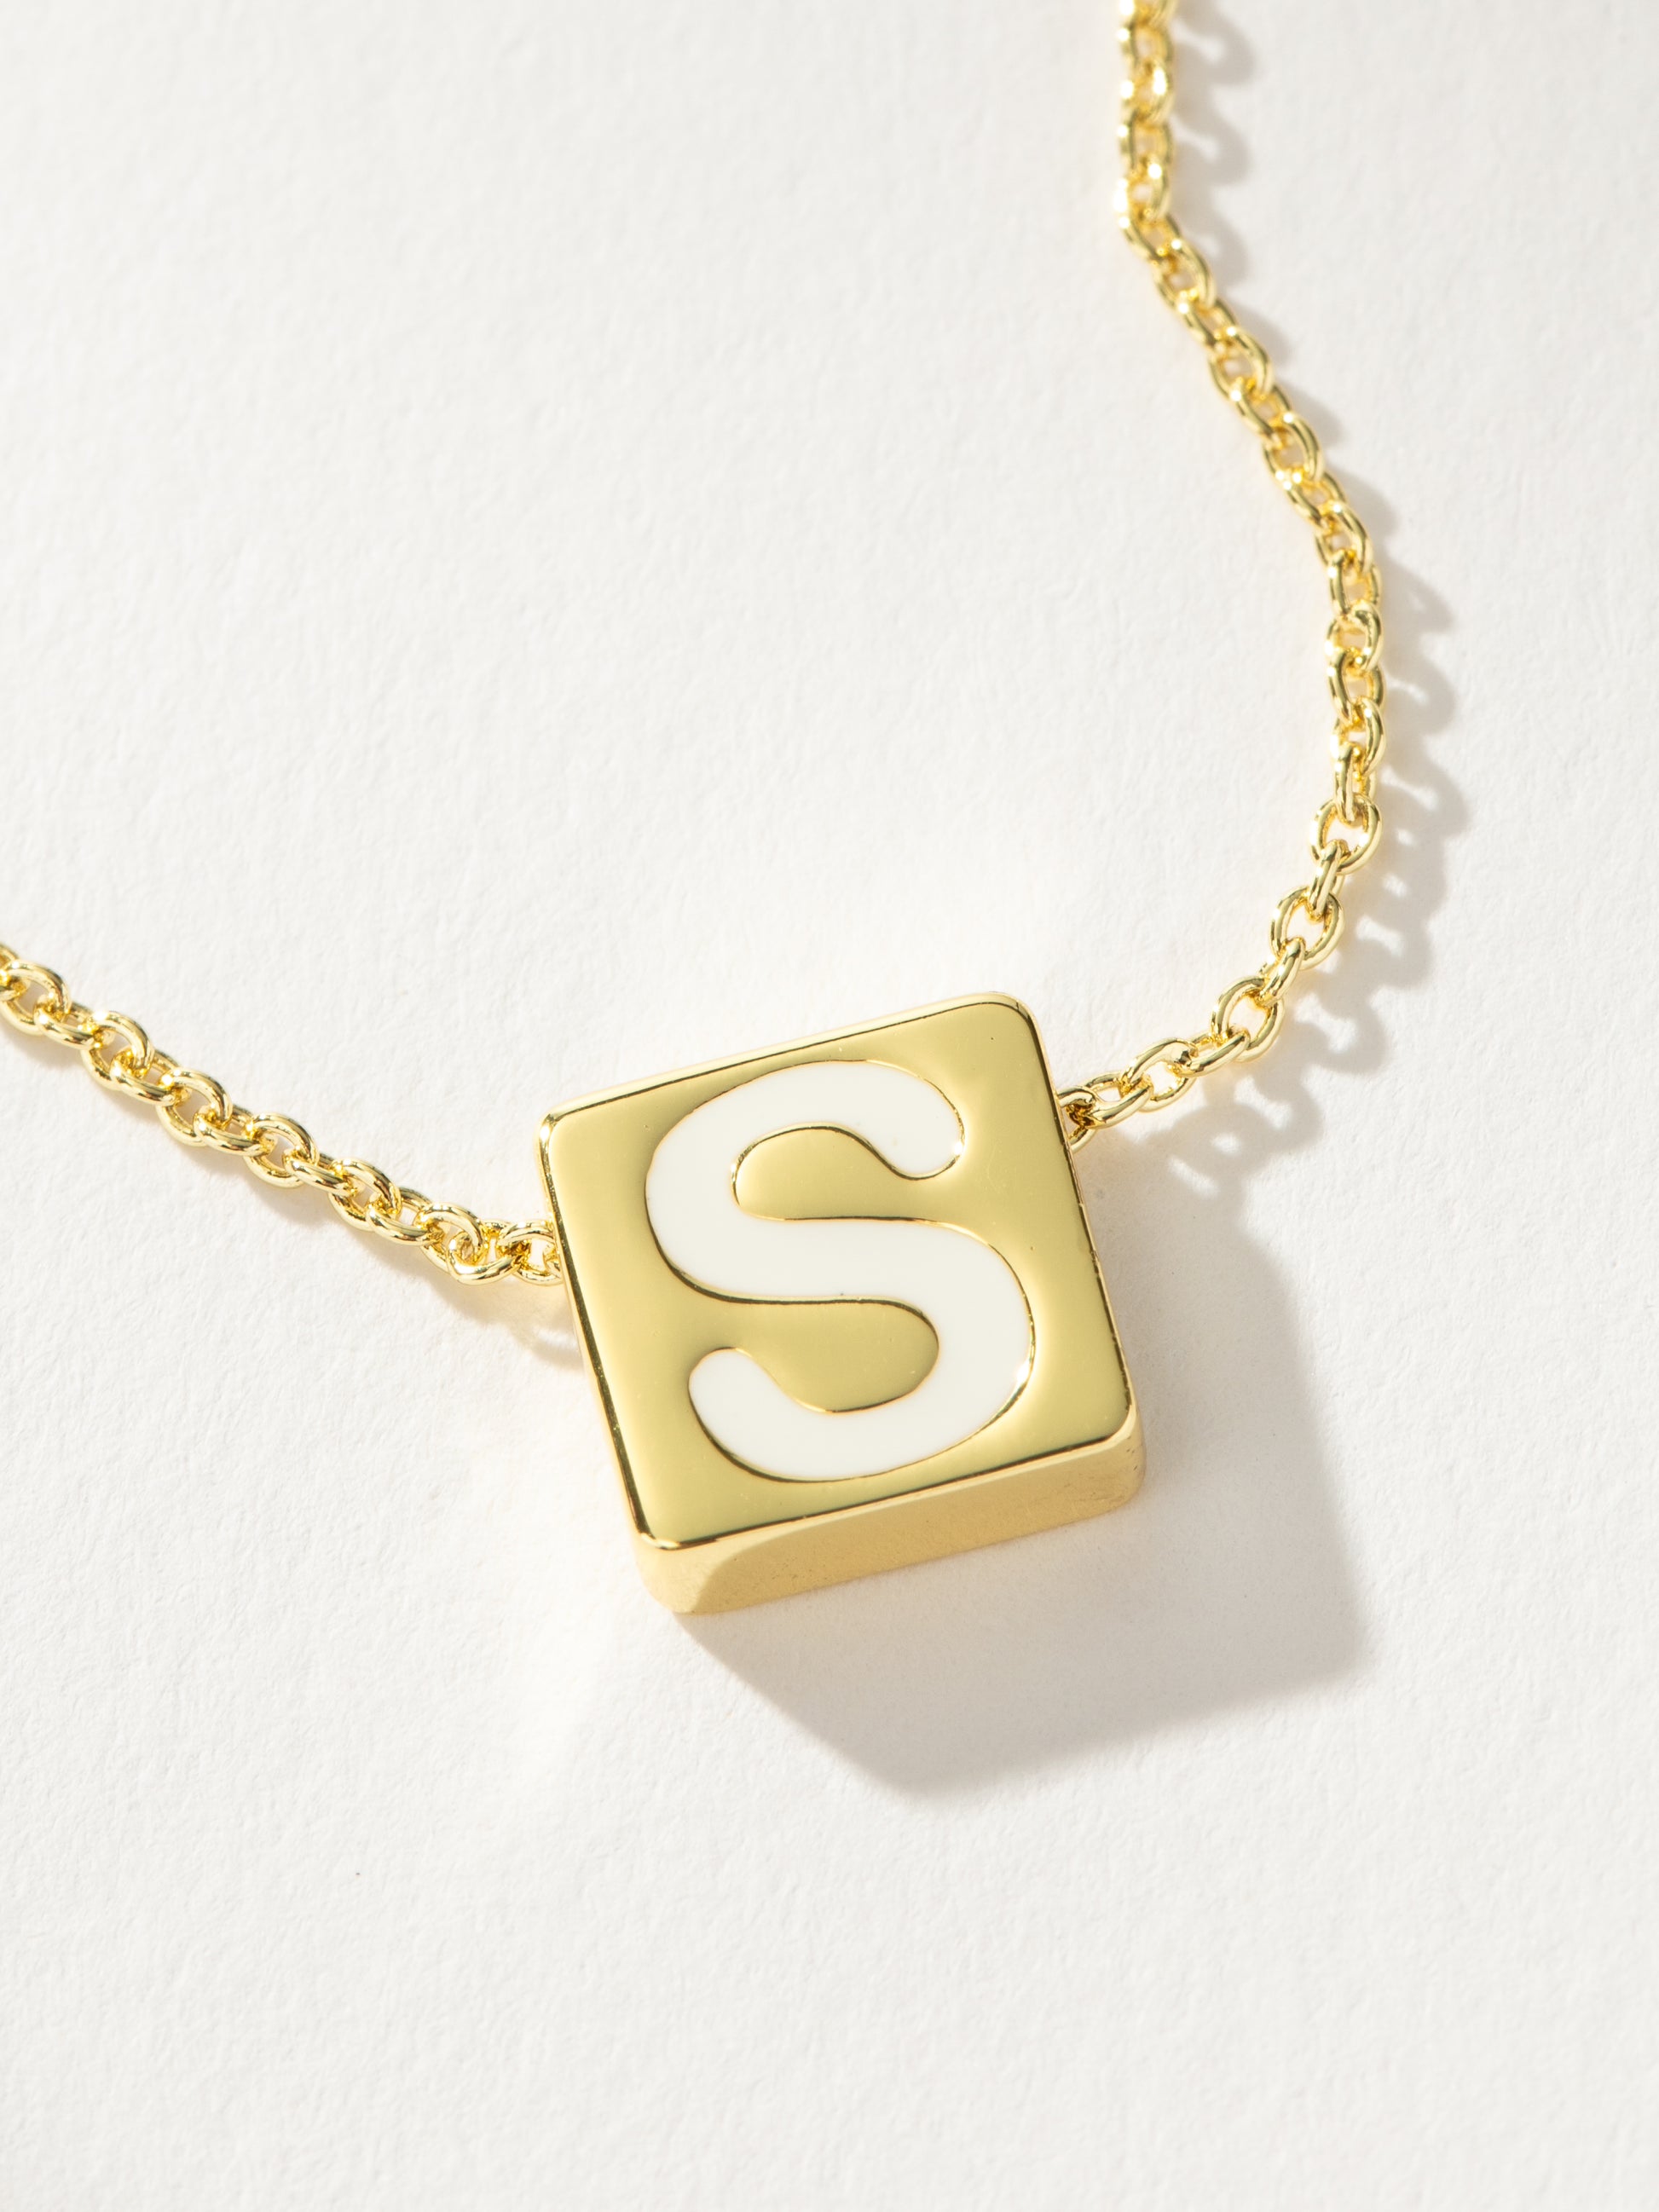 Bold Letter Necklace | Gold S | Product Detail Image | Uncommon James